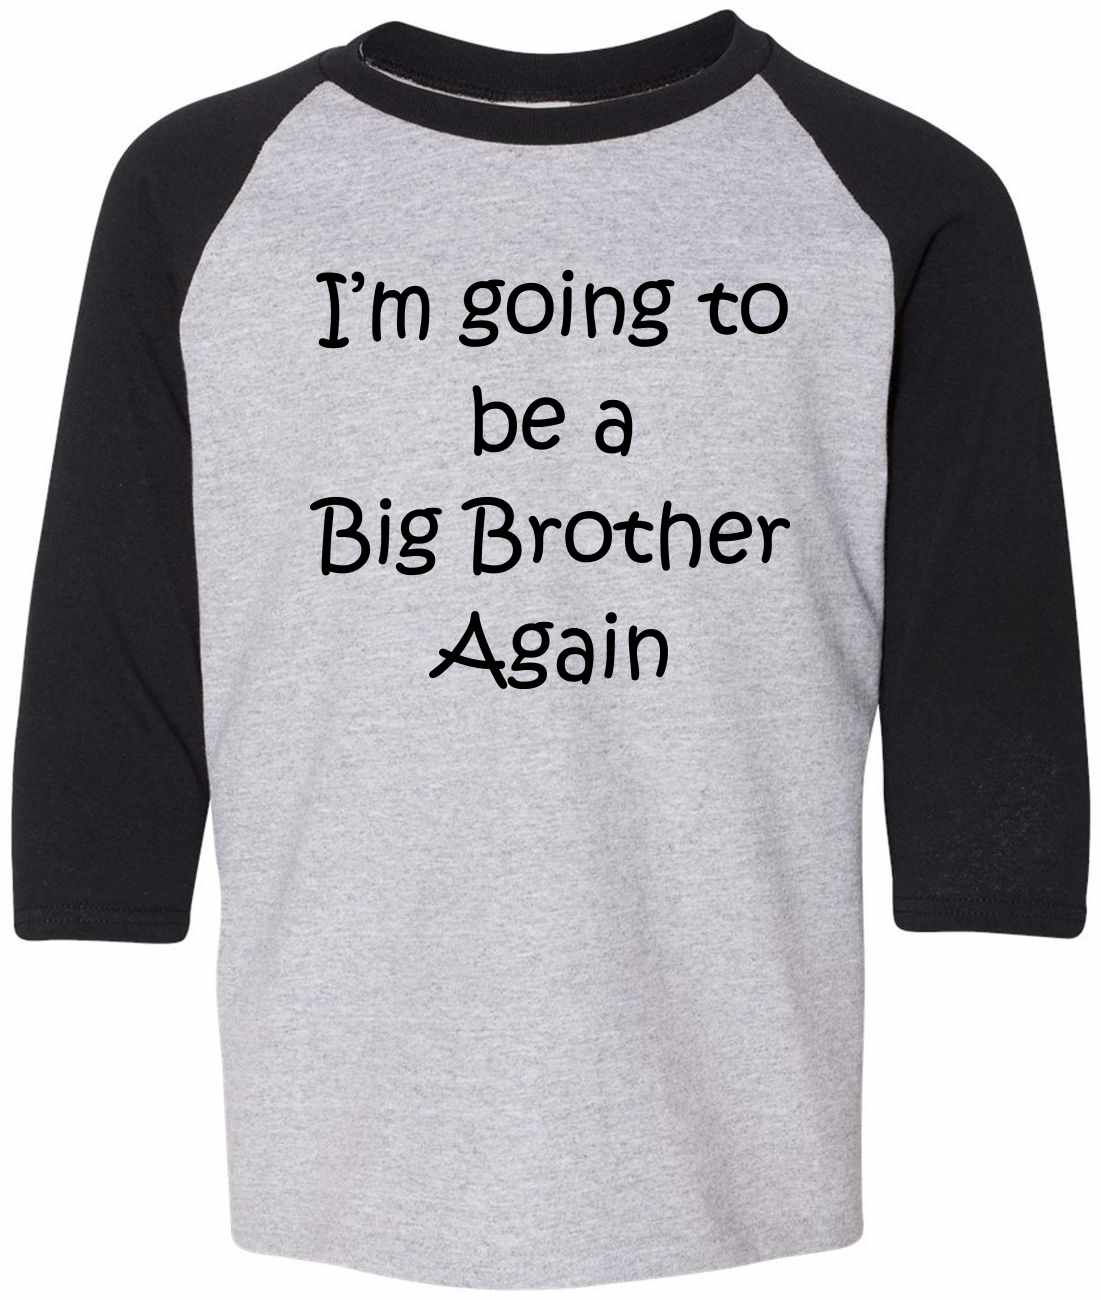 I'm Going to be a Big Brother Again on Youth Baseball Shirt (#813-212)